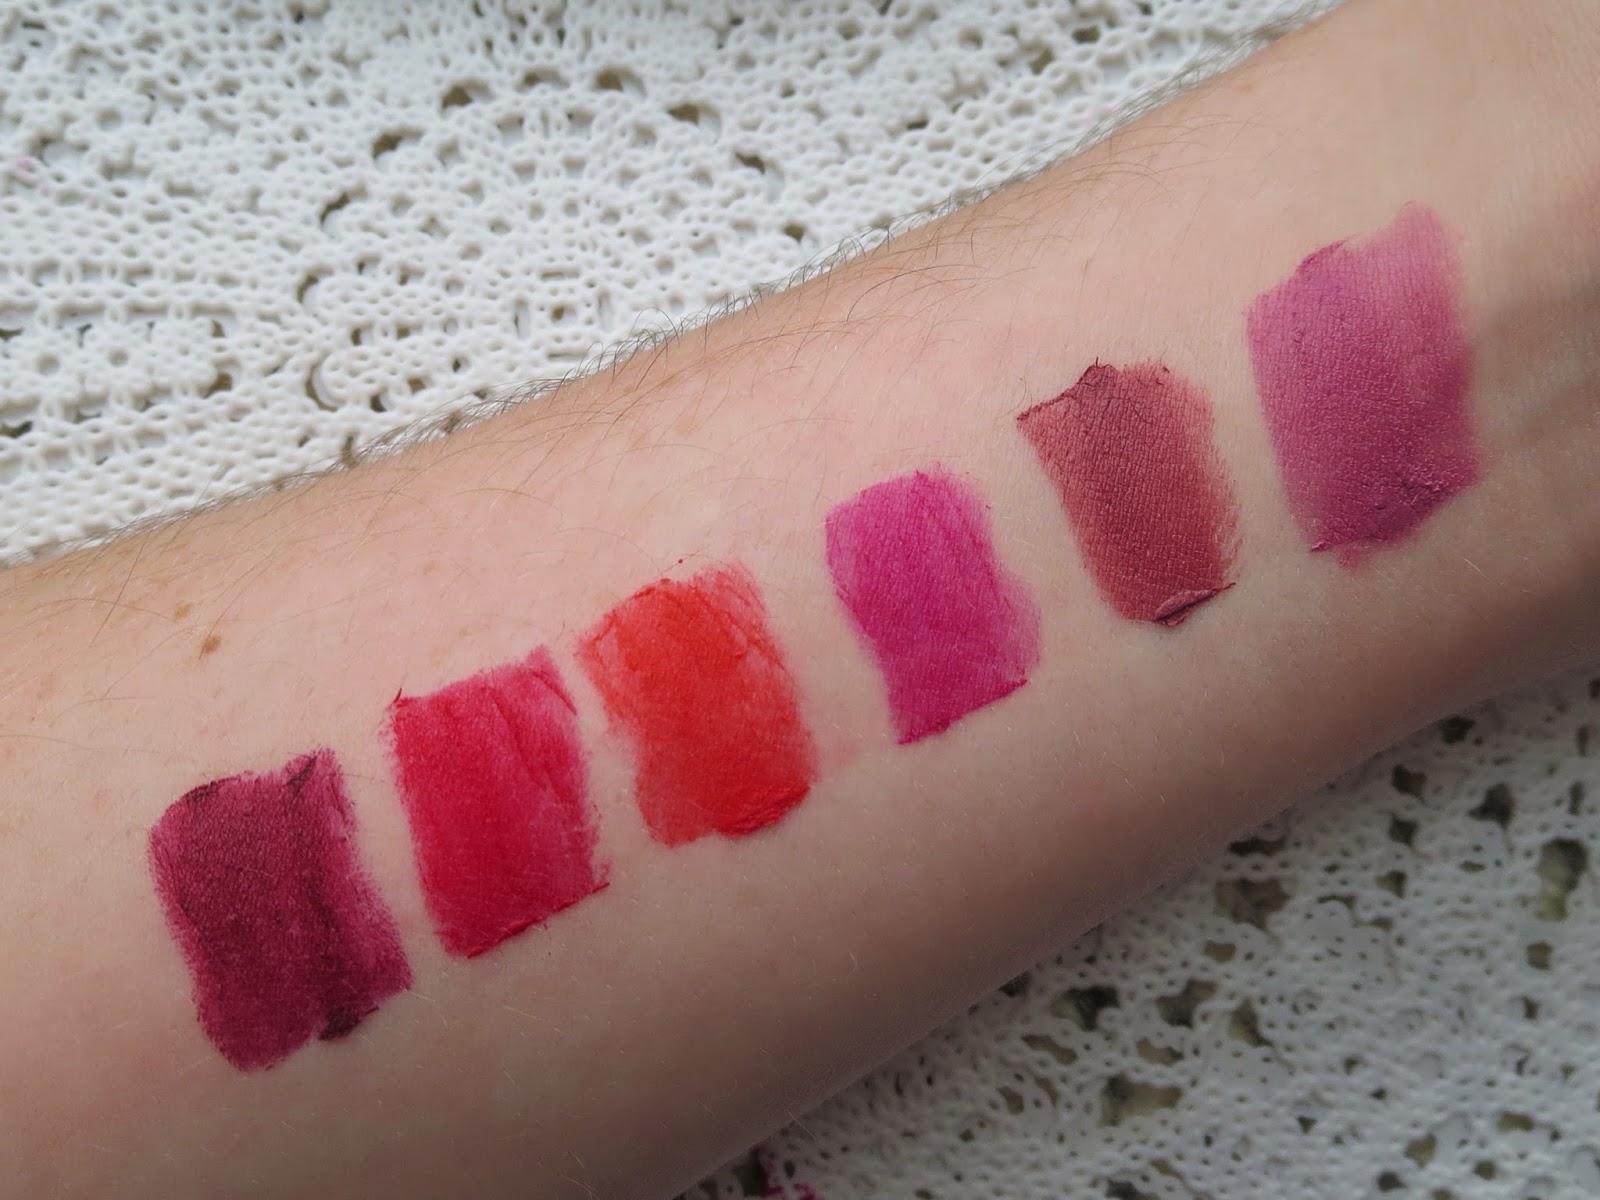 a picture of Maybelline Creamy Matte Lipsticks ; Divine Wine, Siren in Scarlet, Craving Coral, Mesmerizing Magenta, Touch of Spice, Lust for Blush (swatch)